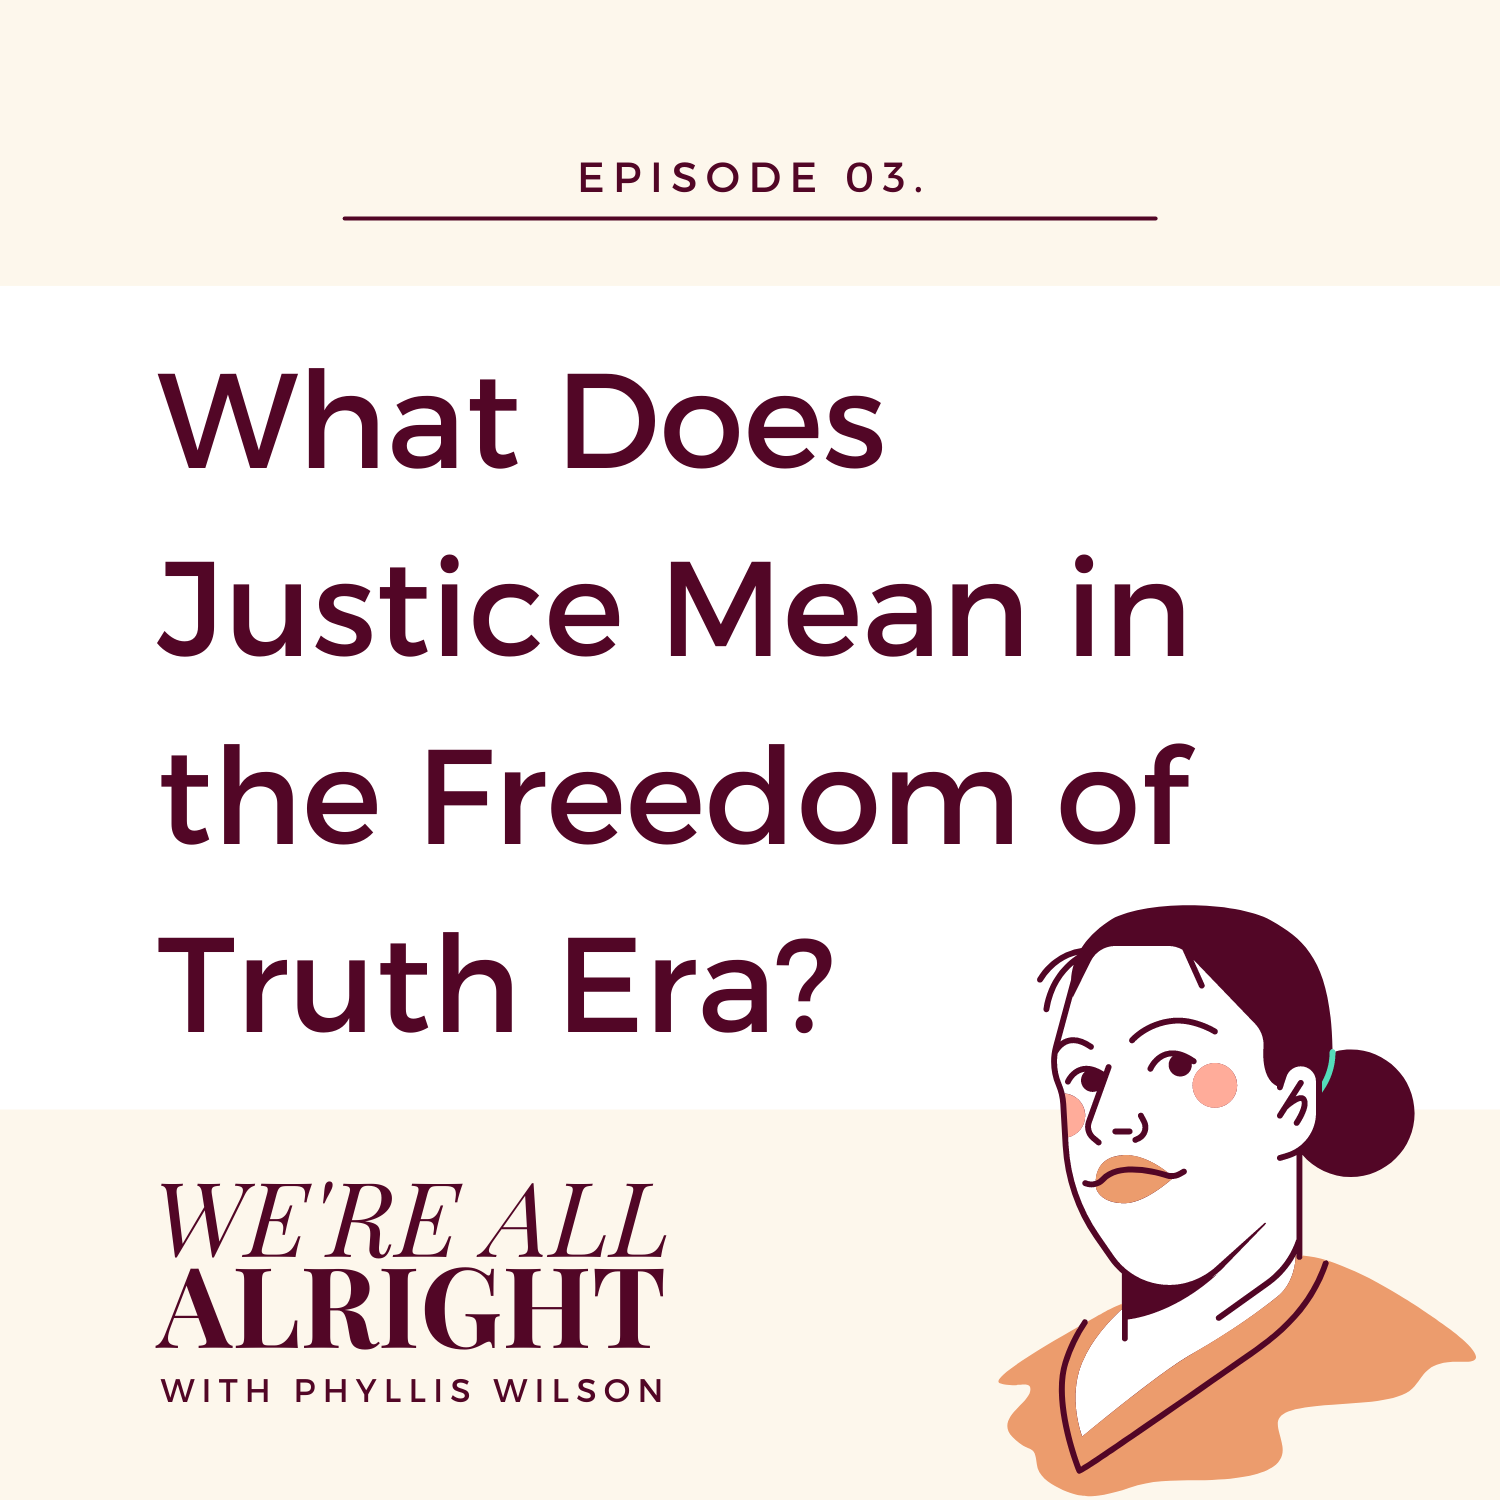 EP 03: What Does Justice Mean in the Freedom of Truth Era?